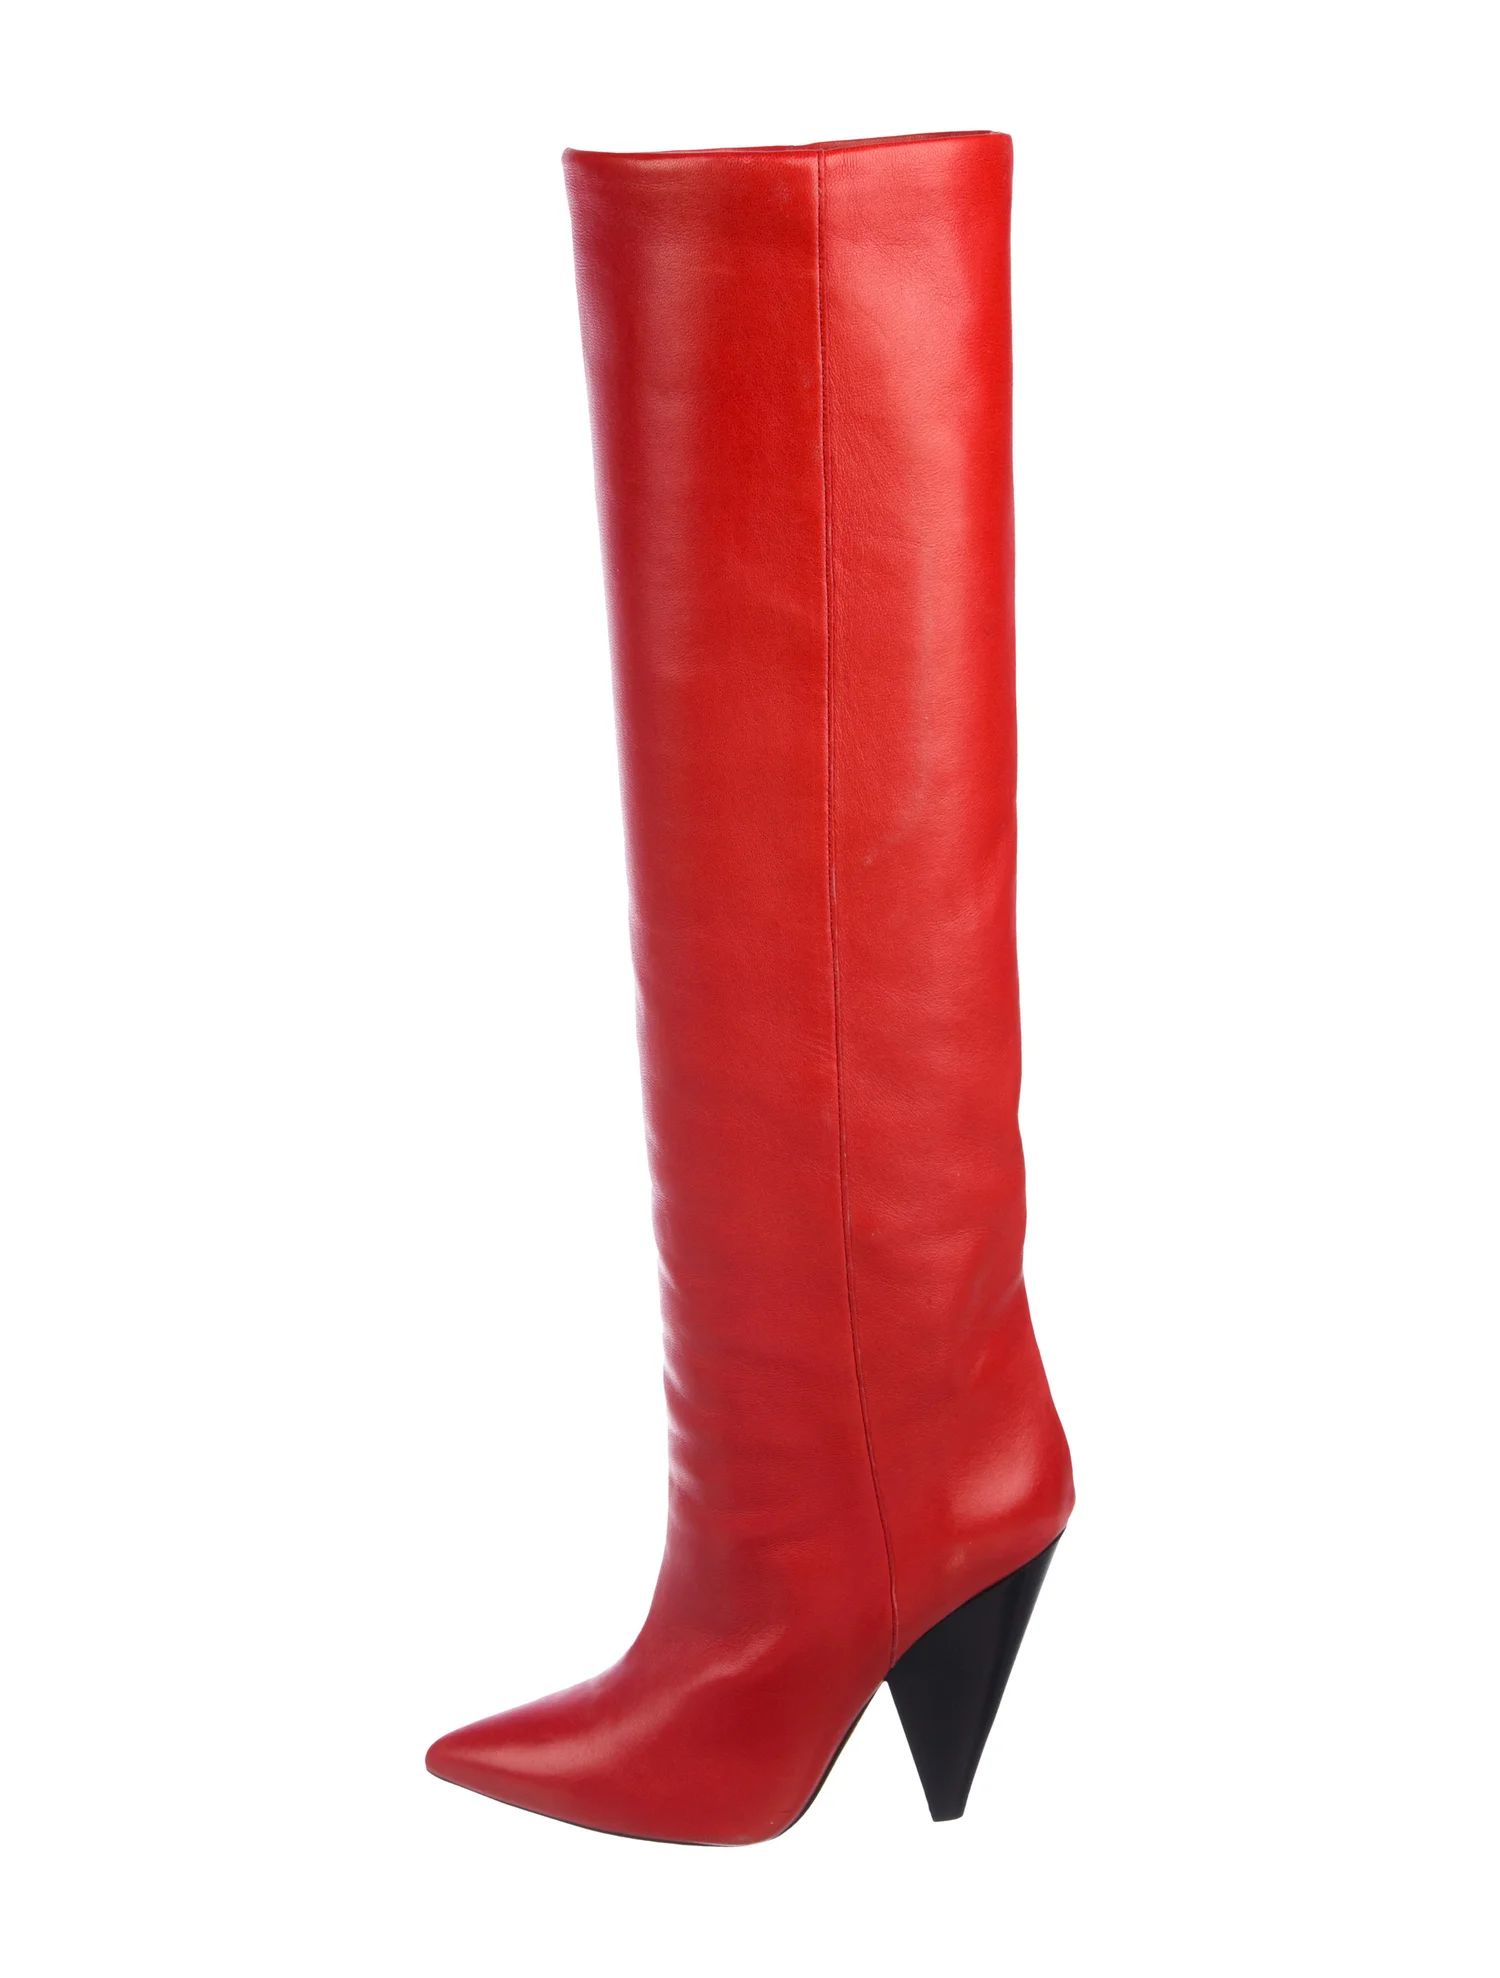 Leather Knee-High Boots | The RealReal